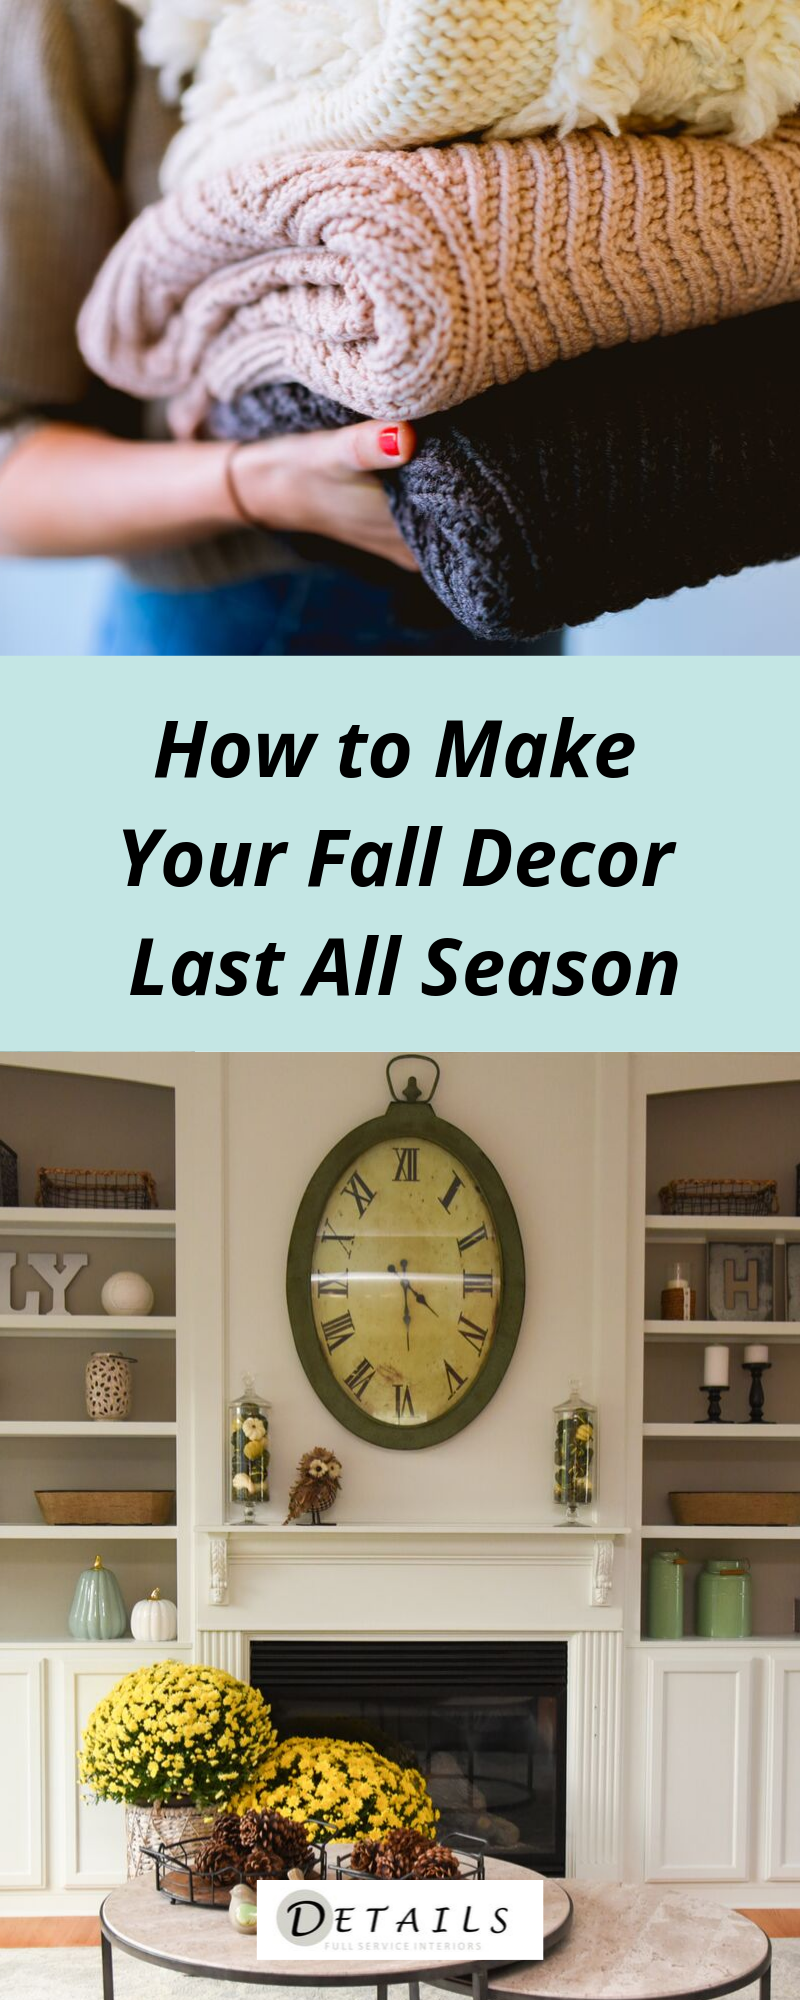 How to Make Your Fall Decor Last All Season